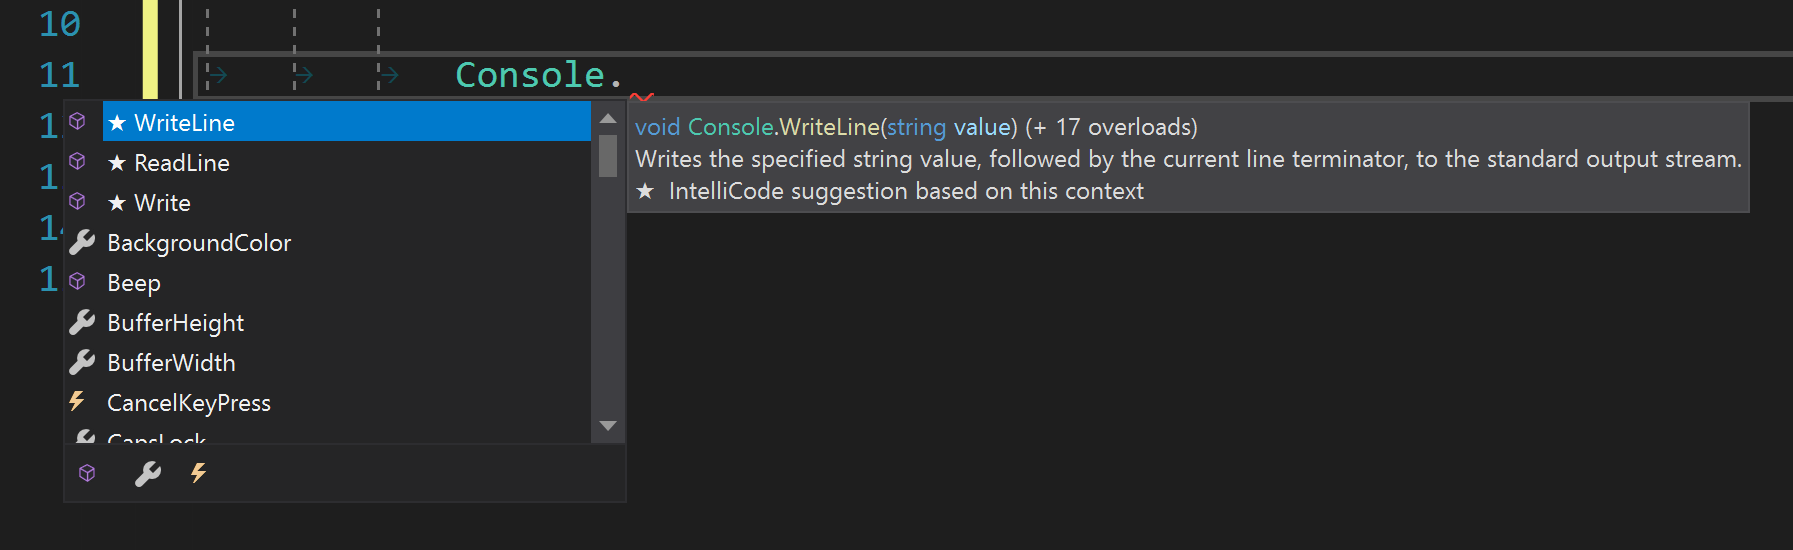 Visual Studio 2019 version 16.1 Preview 3 now available img1.png